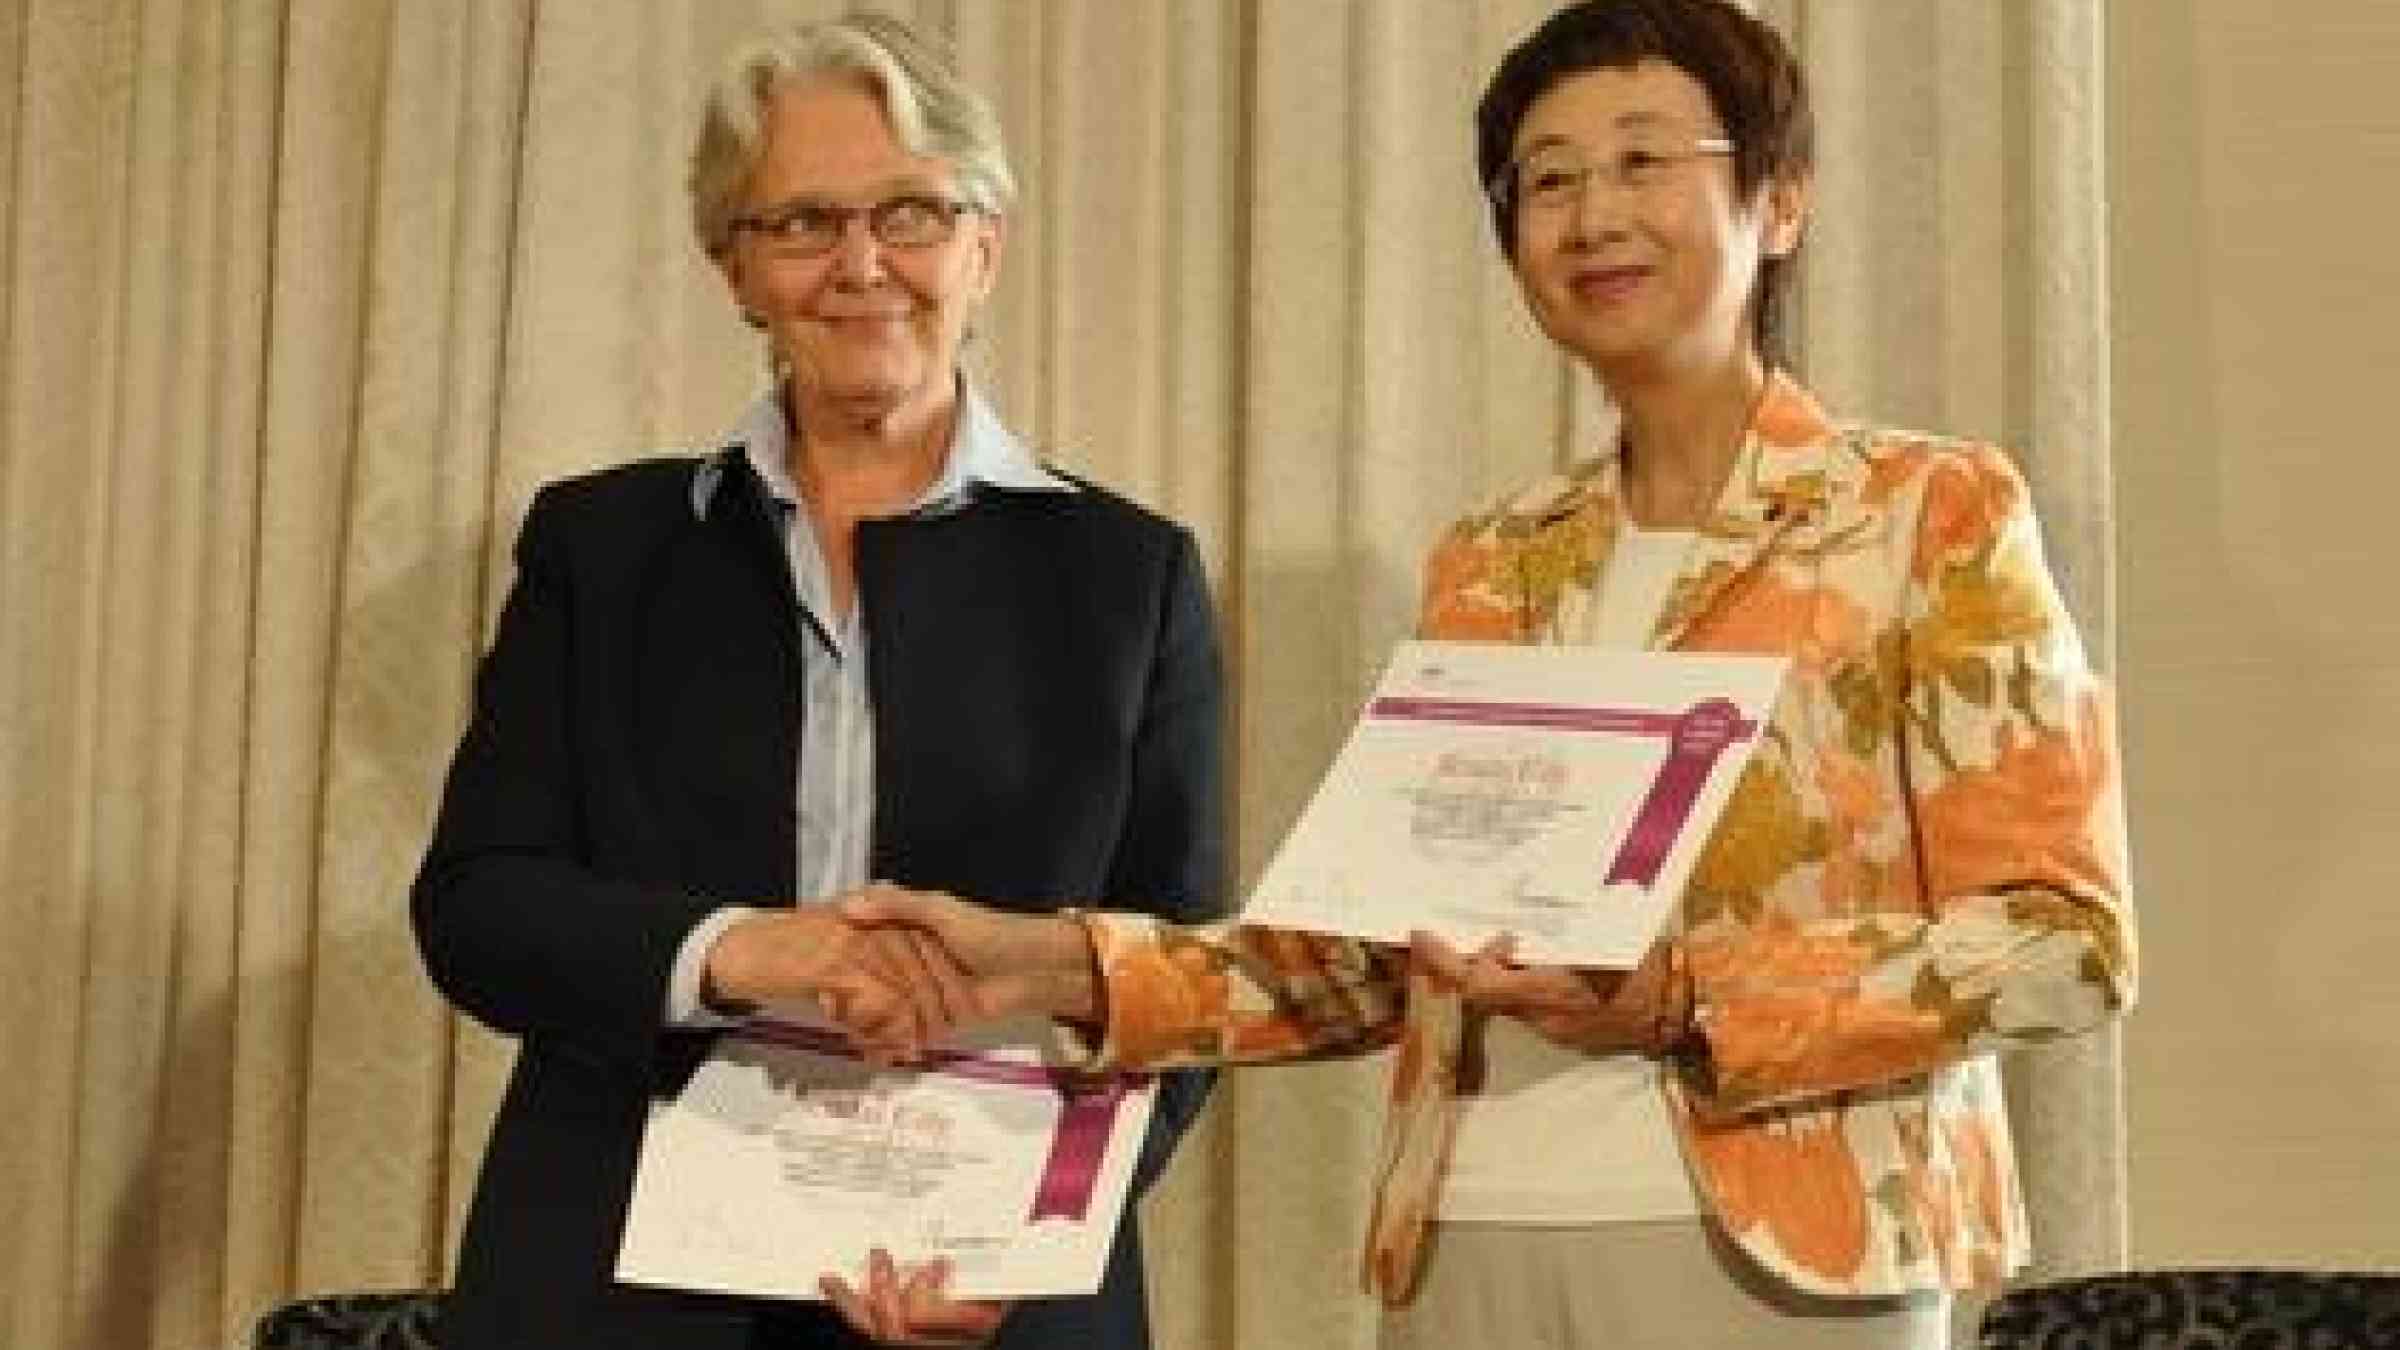 From left: UNISDR Chief Margareta Wahlström presenting the Mayor of Sendai, Emiko Okuyama, with a certificate recognizing Sendai as a role model for the Making Cities Resilient Campaign which now numbers over 2,000 cities and towns around the world. (Photo: UNISDR)